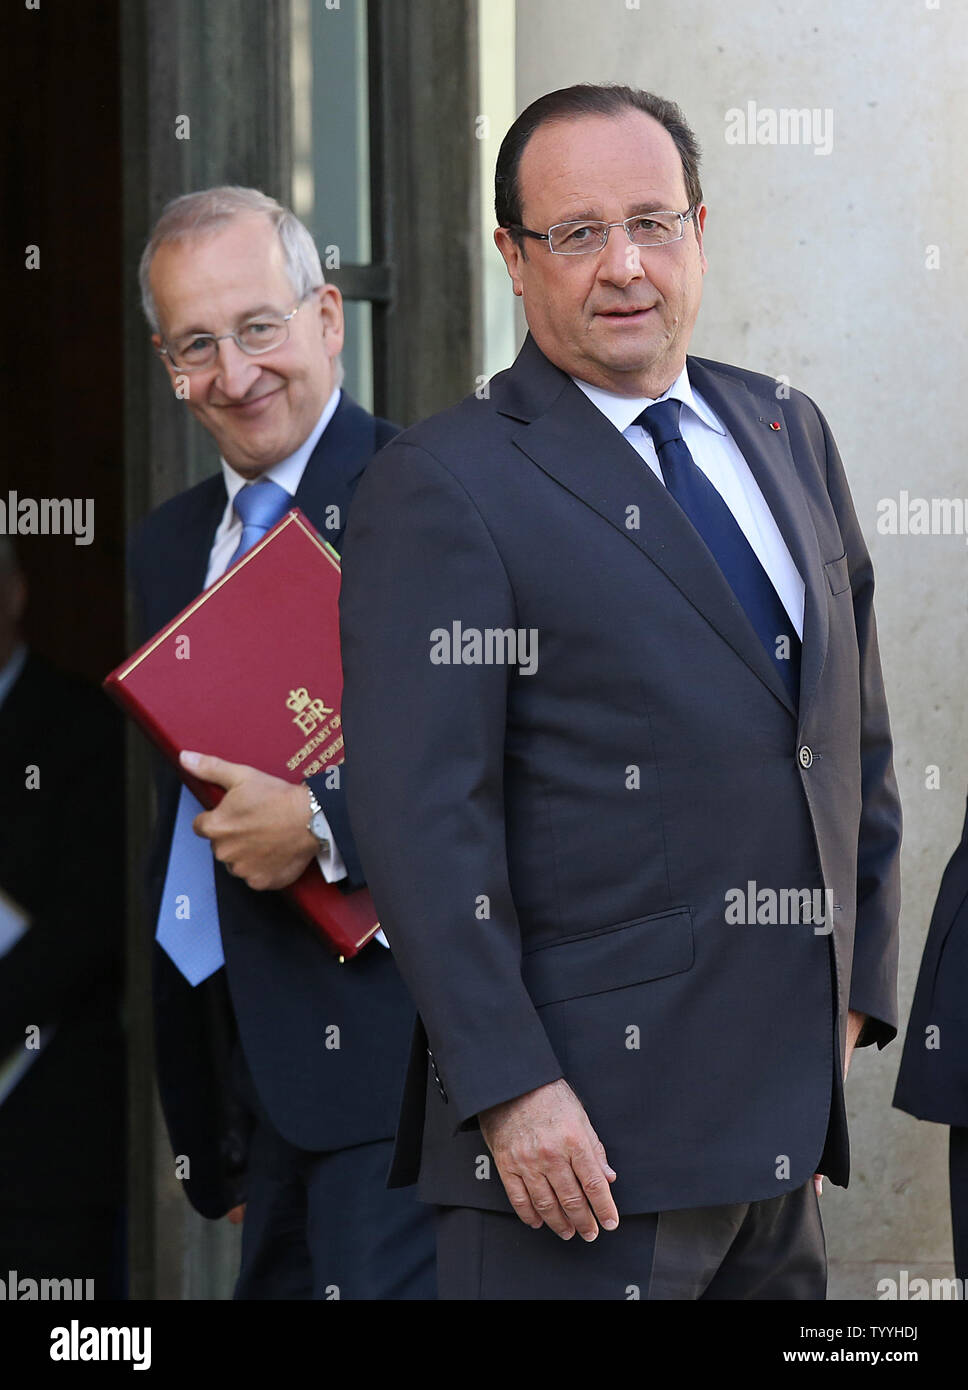 French President Francois Hollande (R) and British Ambassador to France Peter Ricketts await the arrival of British Foreign Secretary William Hague, U.S. Secretary of State John Kerry and French Foreign Minister Laurent Fabius before a meeting on the Syria conflict at the Elysee Palace in Paris on September 16, 2013.    UPI/David Silpa Stock Photo